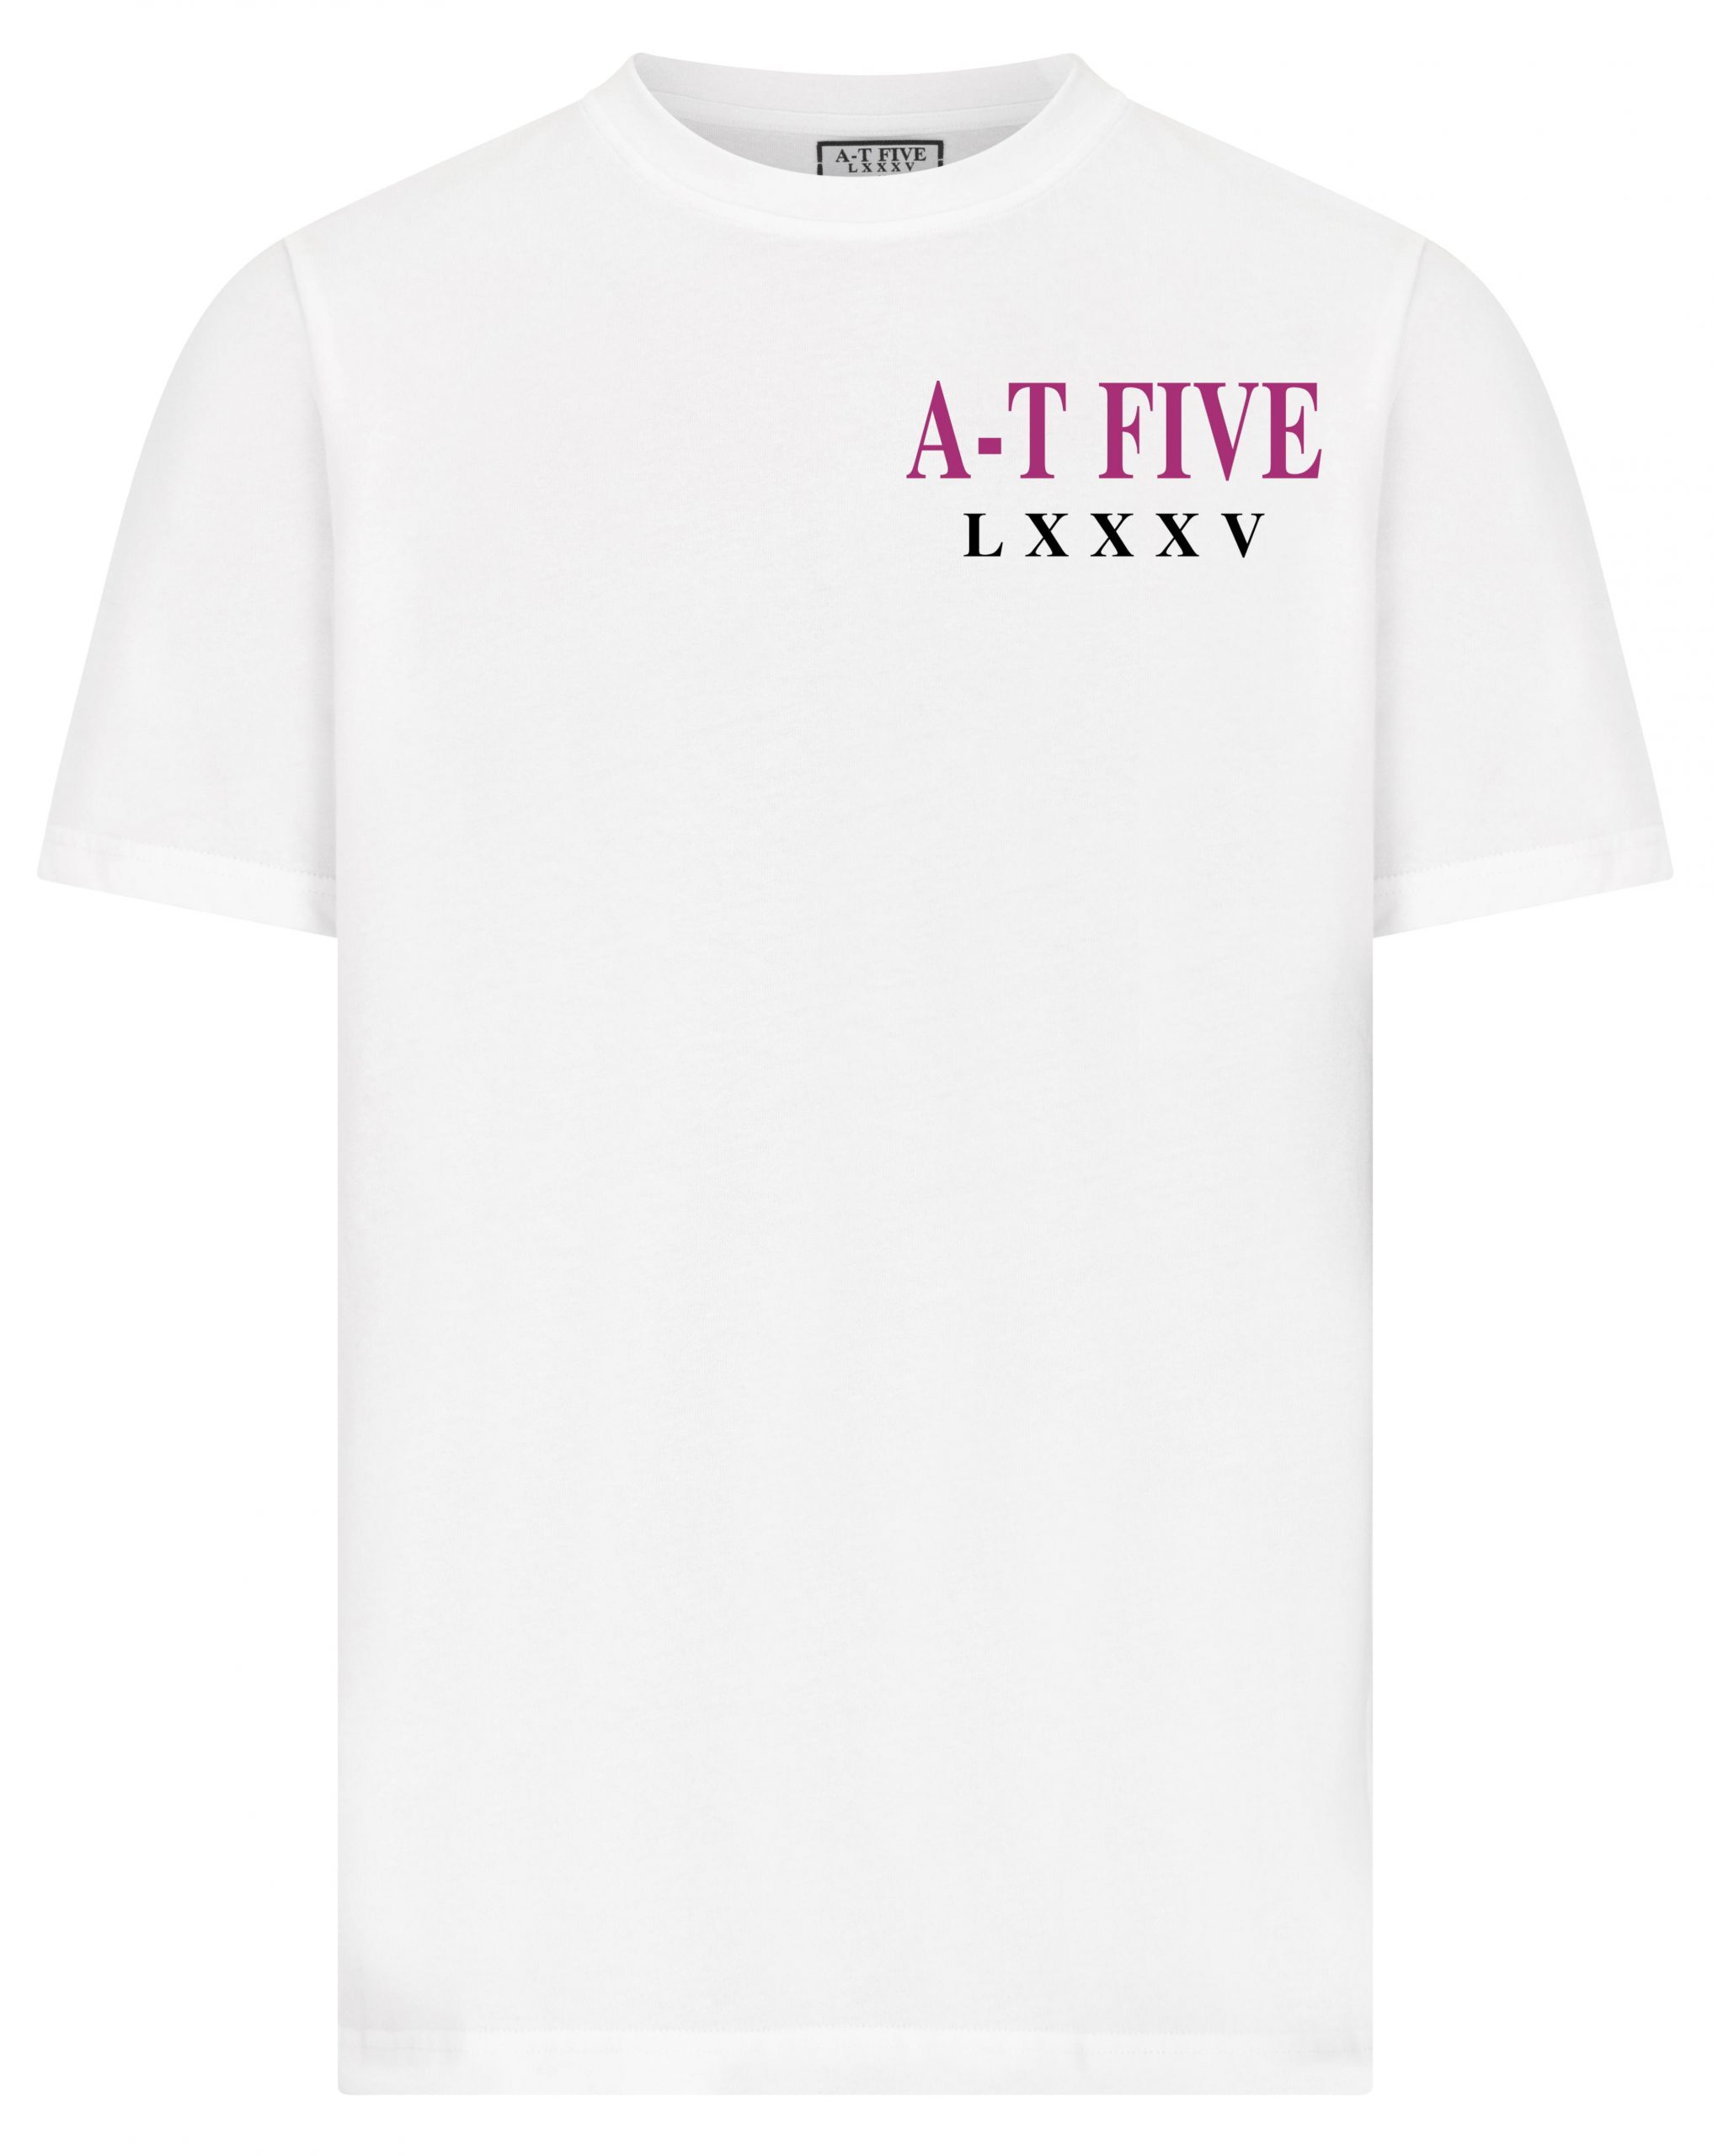 A-T FIVE chest printed T-Shirt - a-t-five